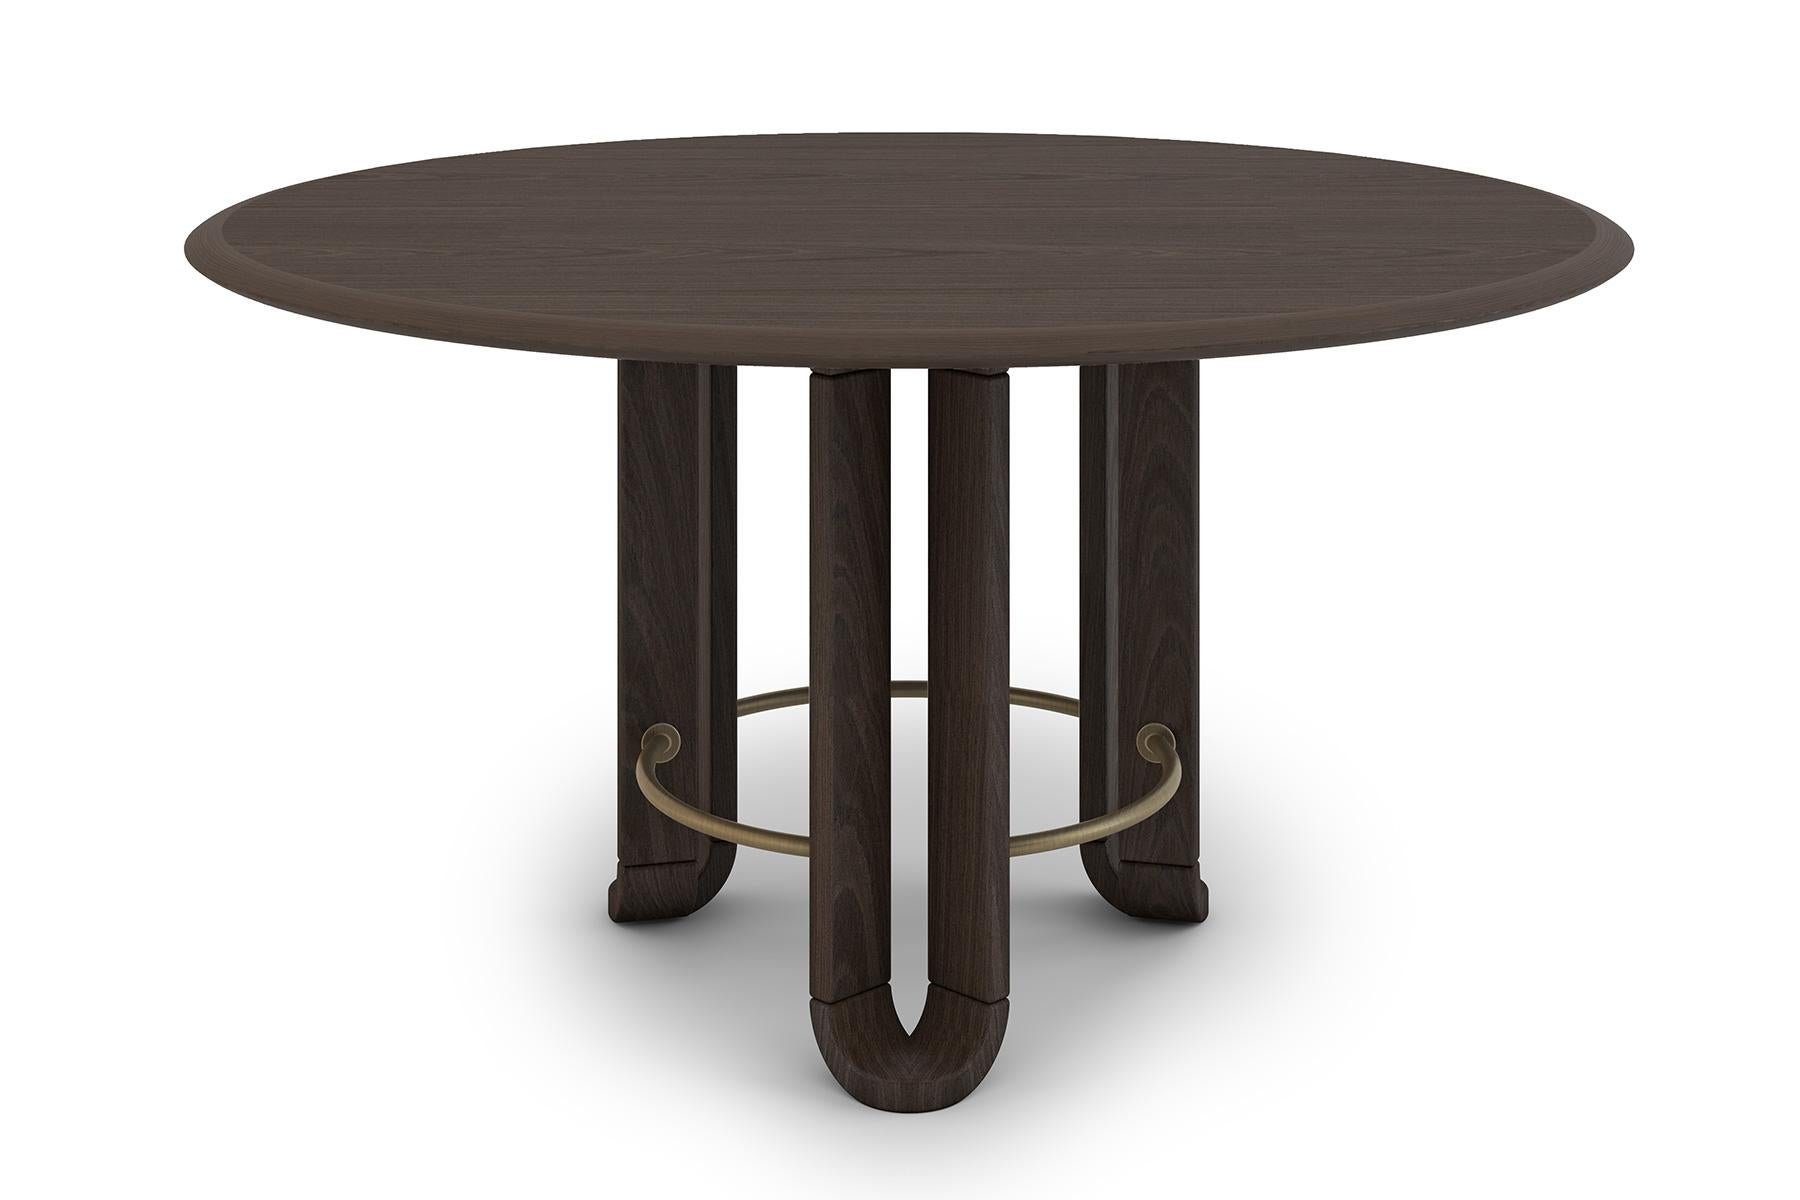 Unique round yaprak dining table by Ekin Varon
Dimensions: D 140 x 75 H
Materials: walnut, maple, oak
Custom materials, sizing and finishes available as item is made to order.

Ekin Varon is the founder and creative director of Ekin Varon